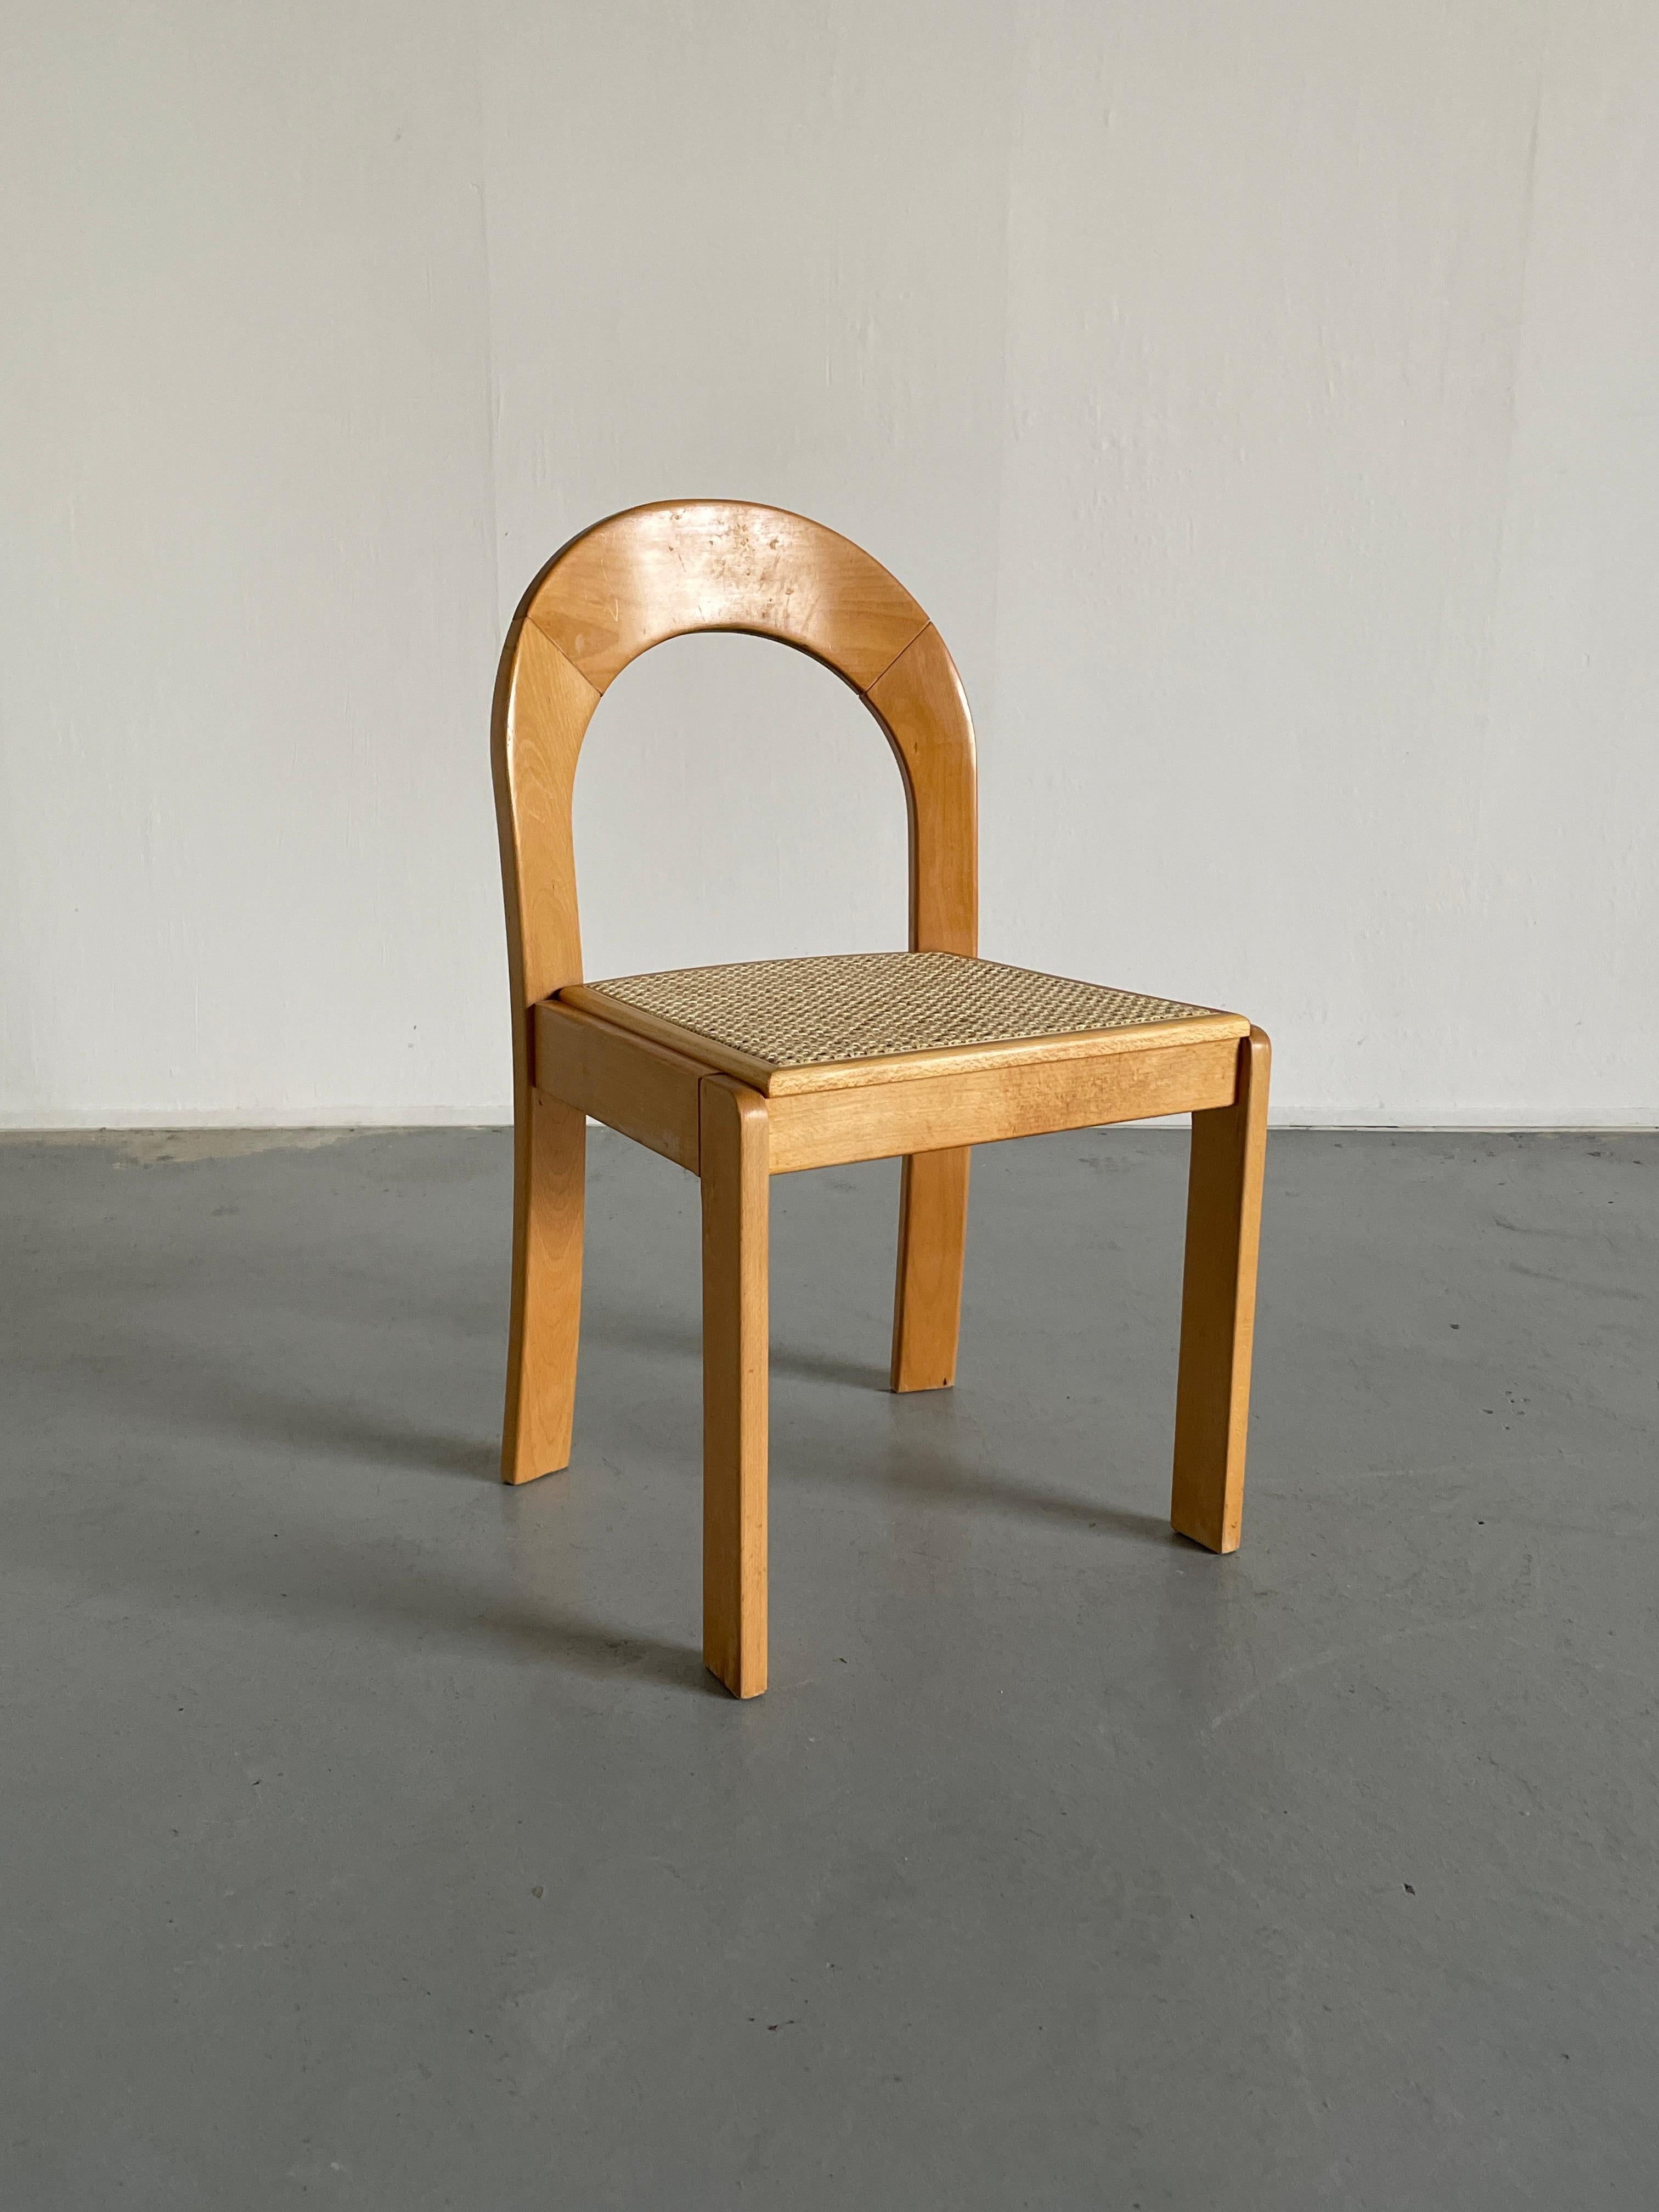 Late 20th Century 1 of 3 Vintage Dining Chairs Attributed to Tagliabue di Cascina Armata, 1974